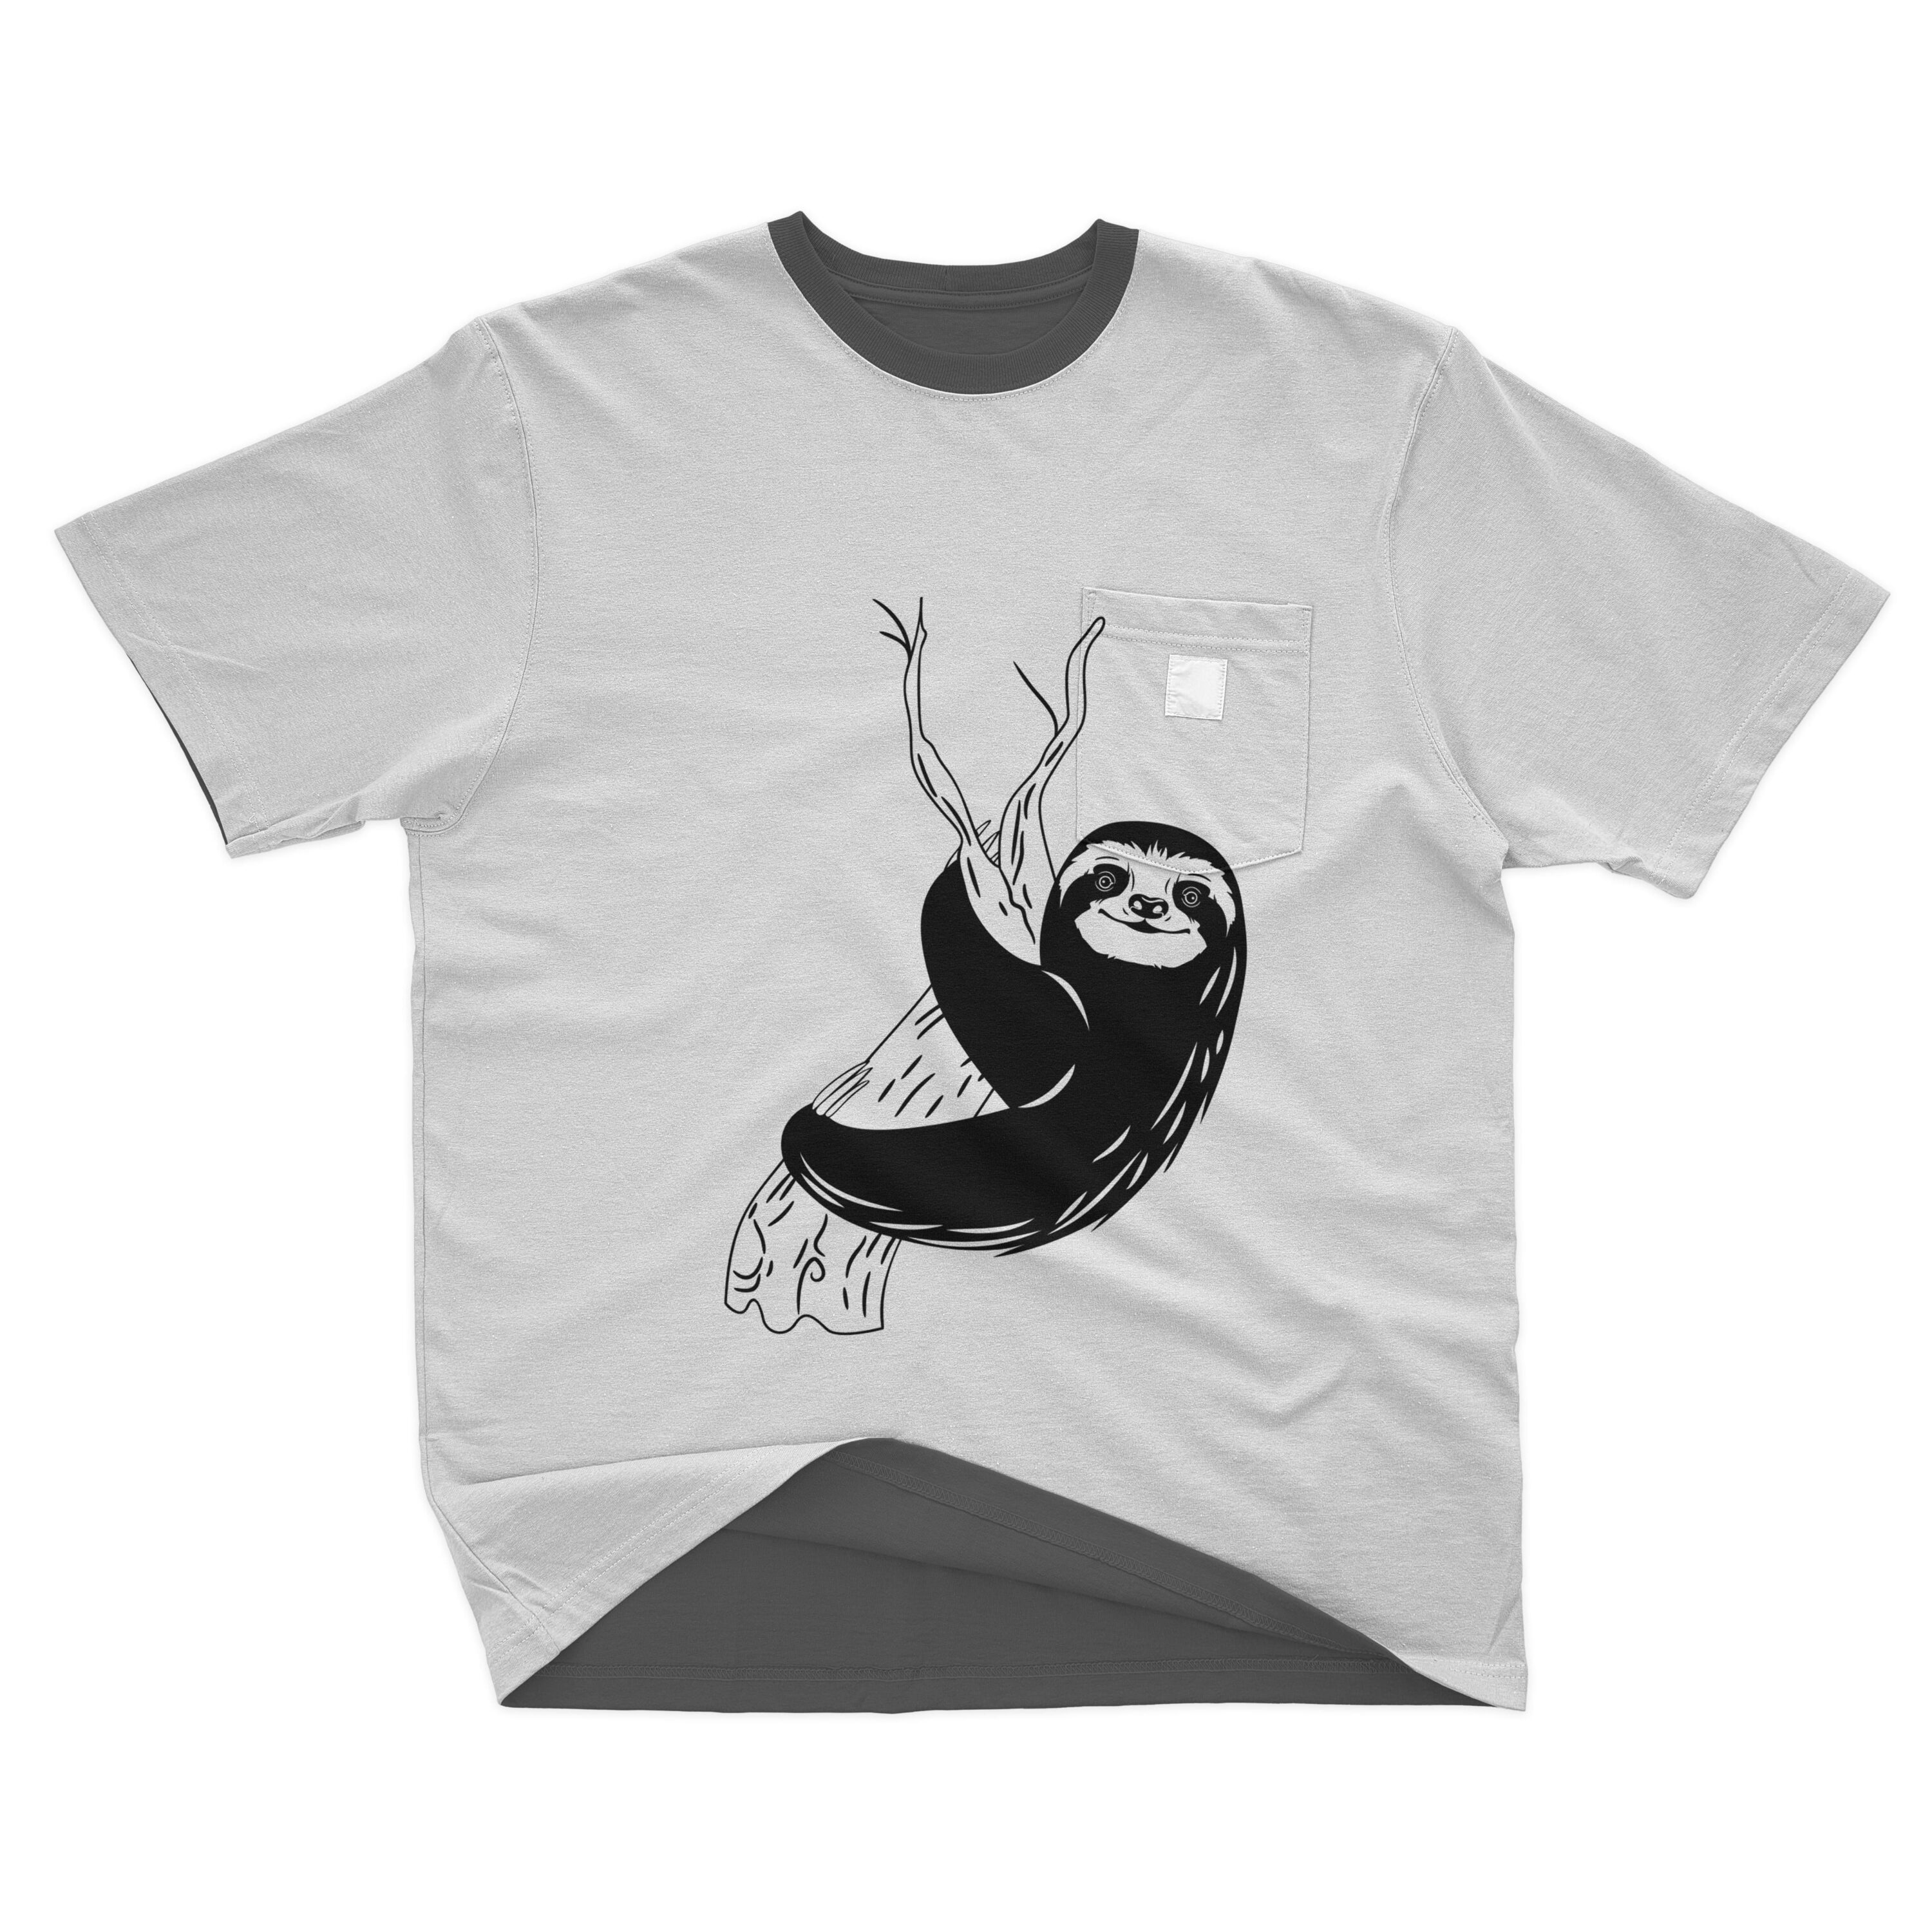 Picture of a white t-shirt with an adorable black and white sloth print.